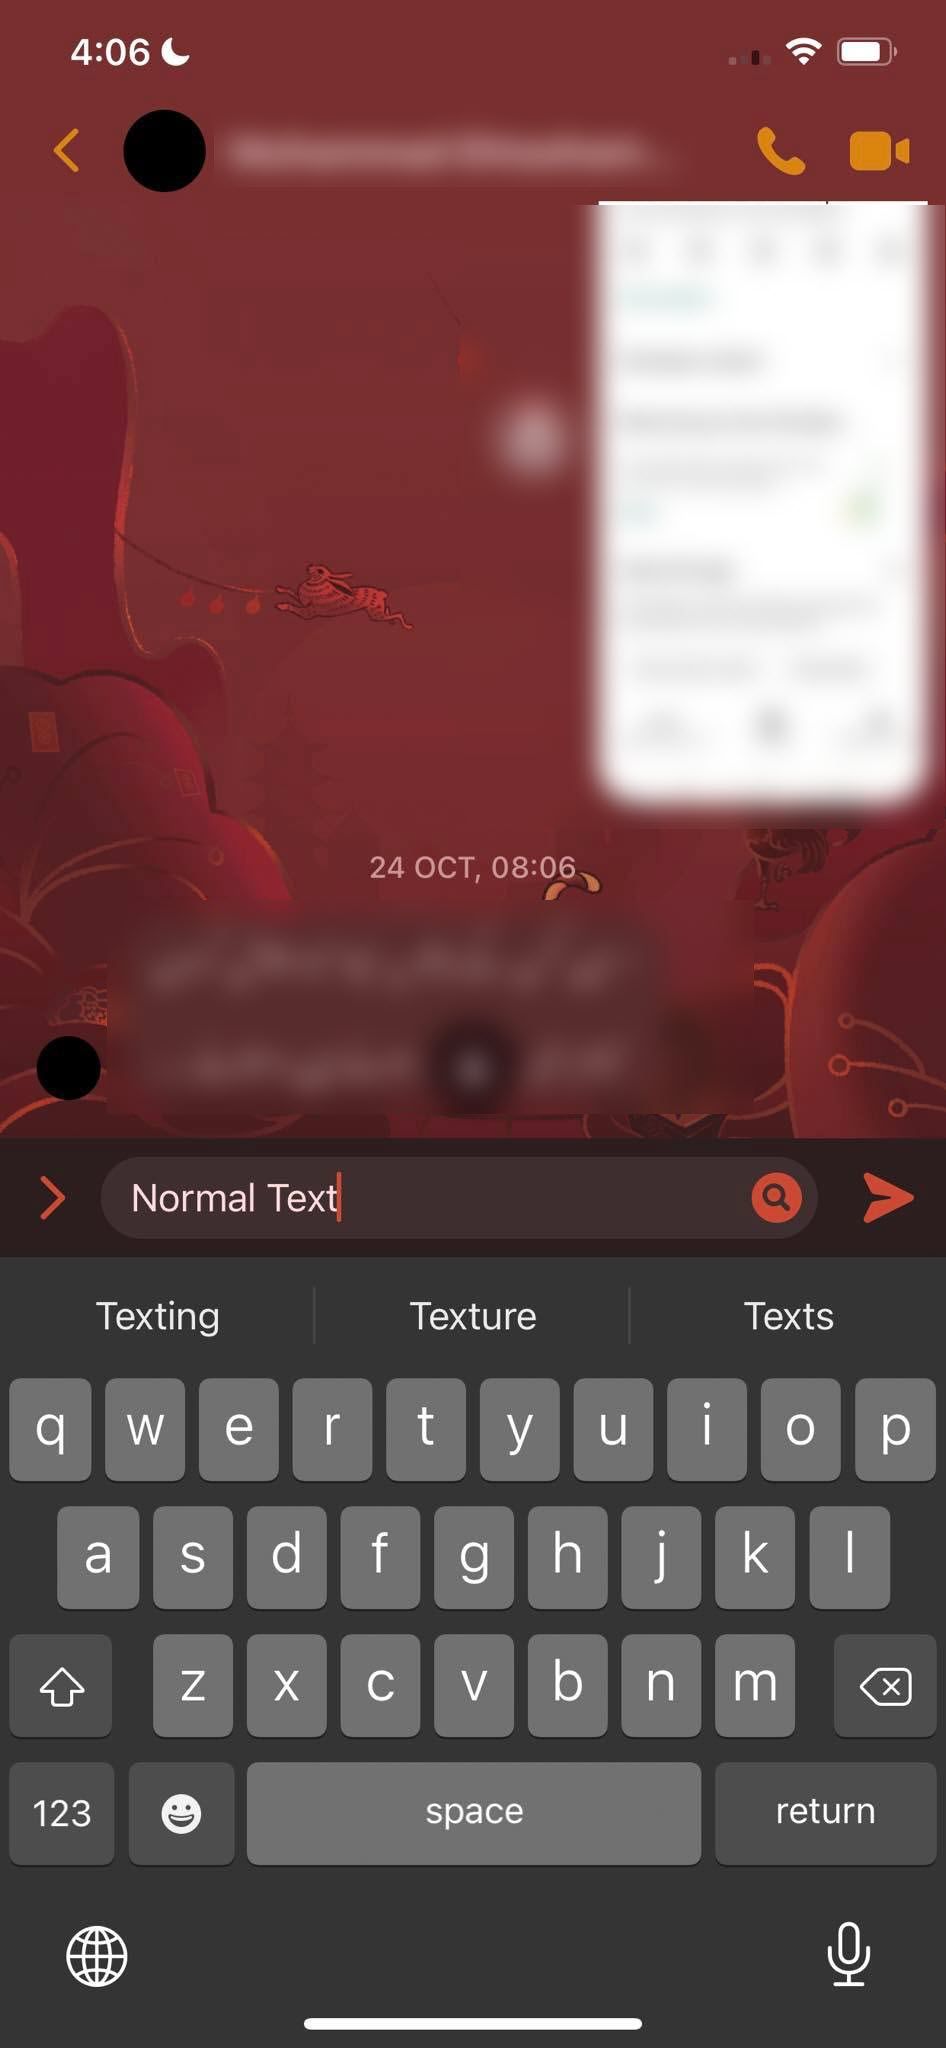 Showing How a Normal Text Font Looks Like in Messenger App